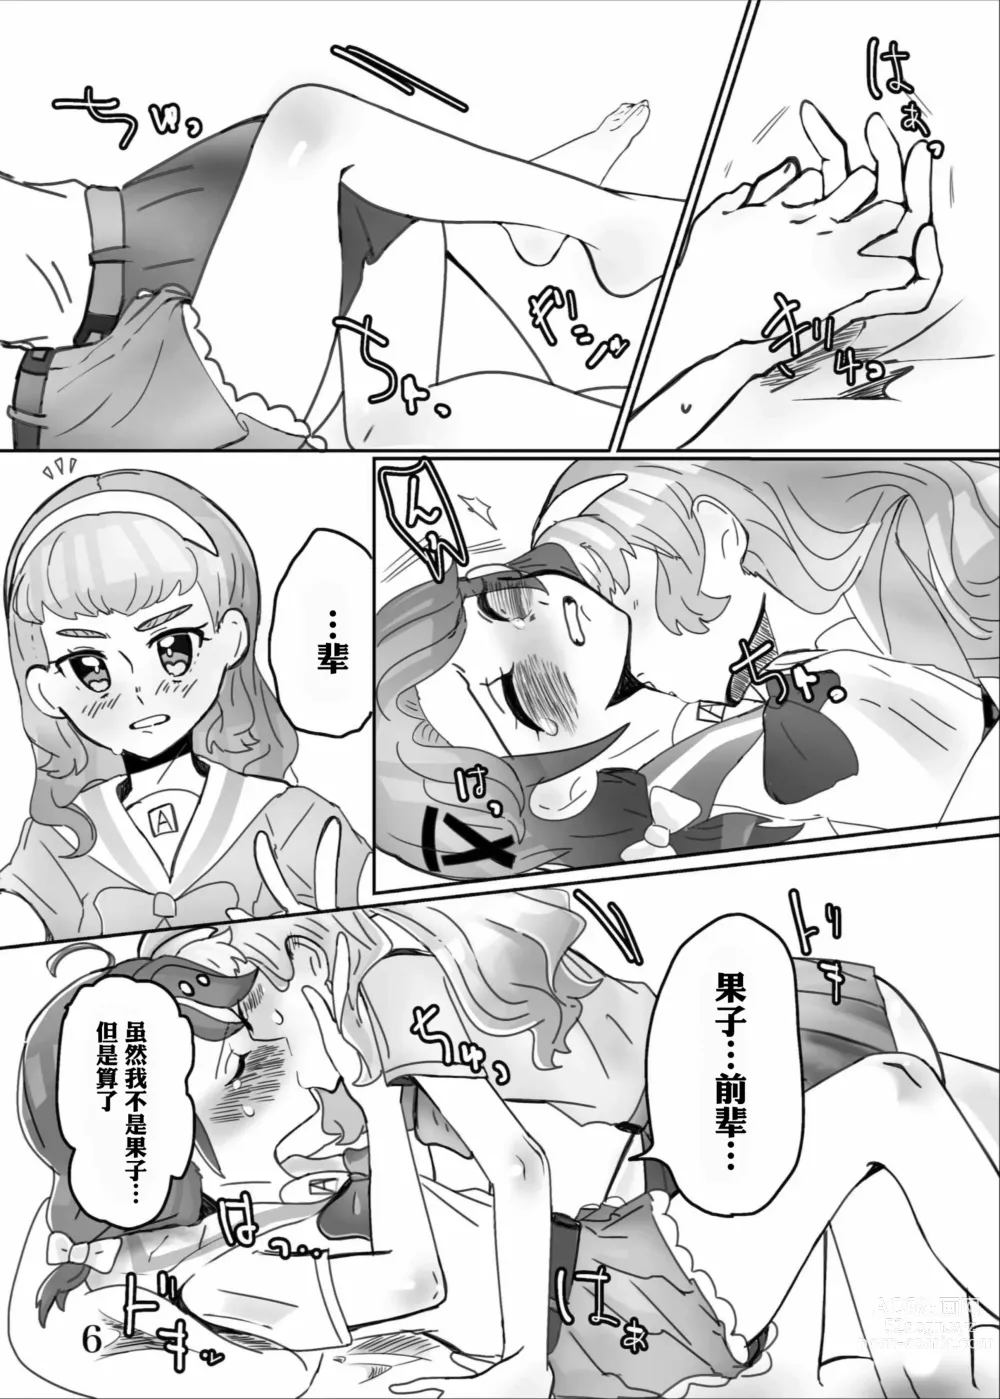 Page 8 of doujinshi 想做能干的孩子♪ DO MY BEST!